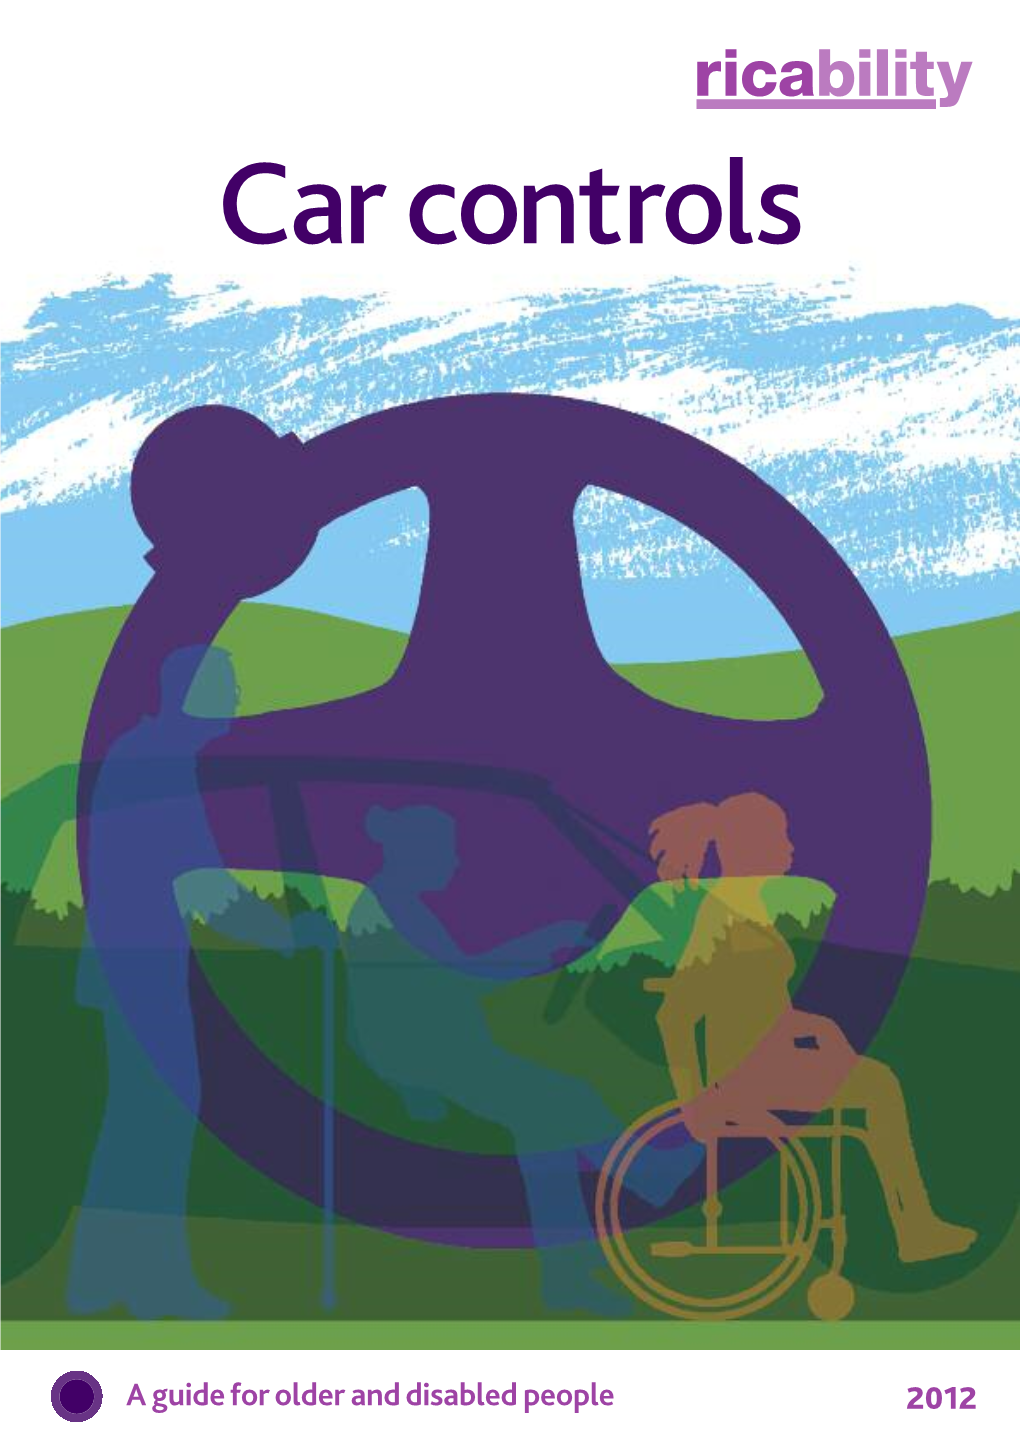 Car Controls Speed – You Twist the Handle to Accelerate and Push the Tiller Forwards to Brake